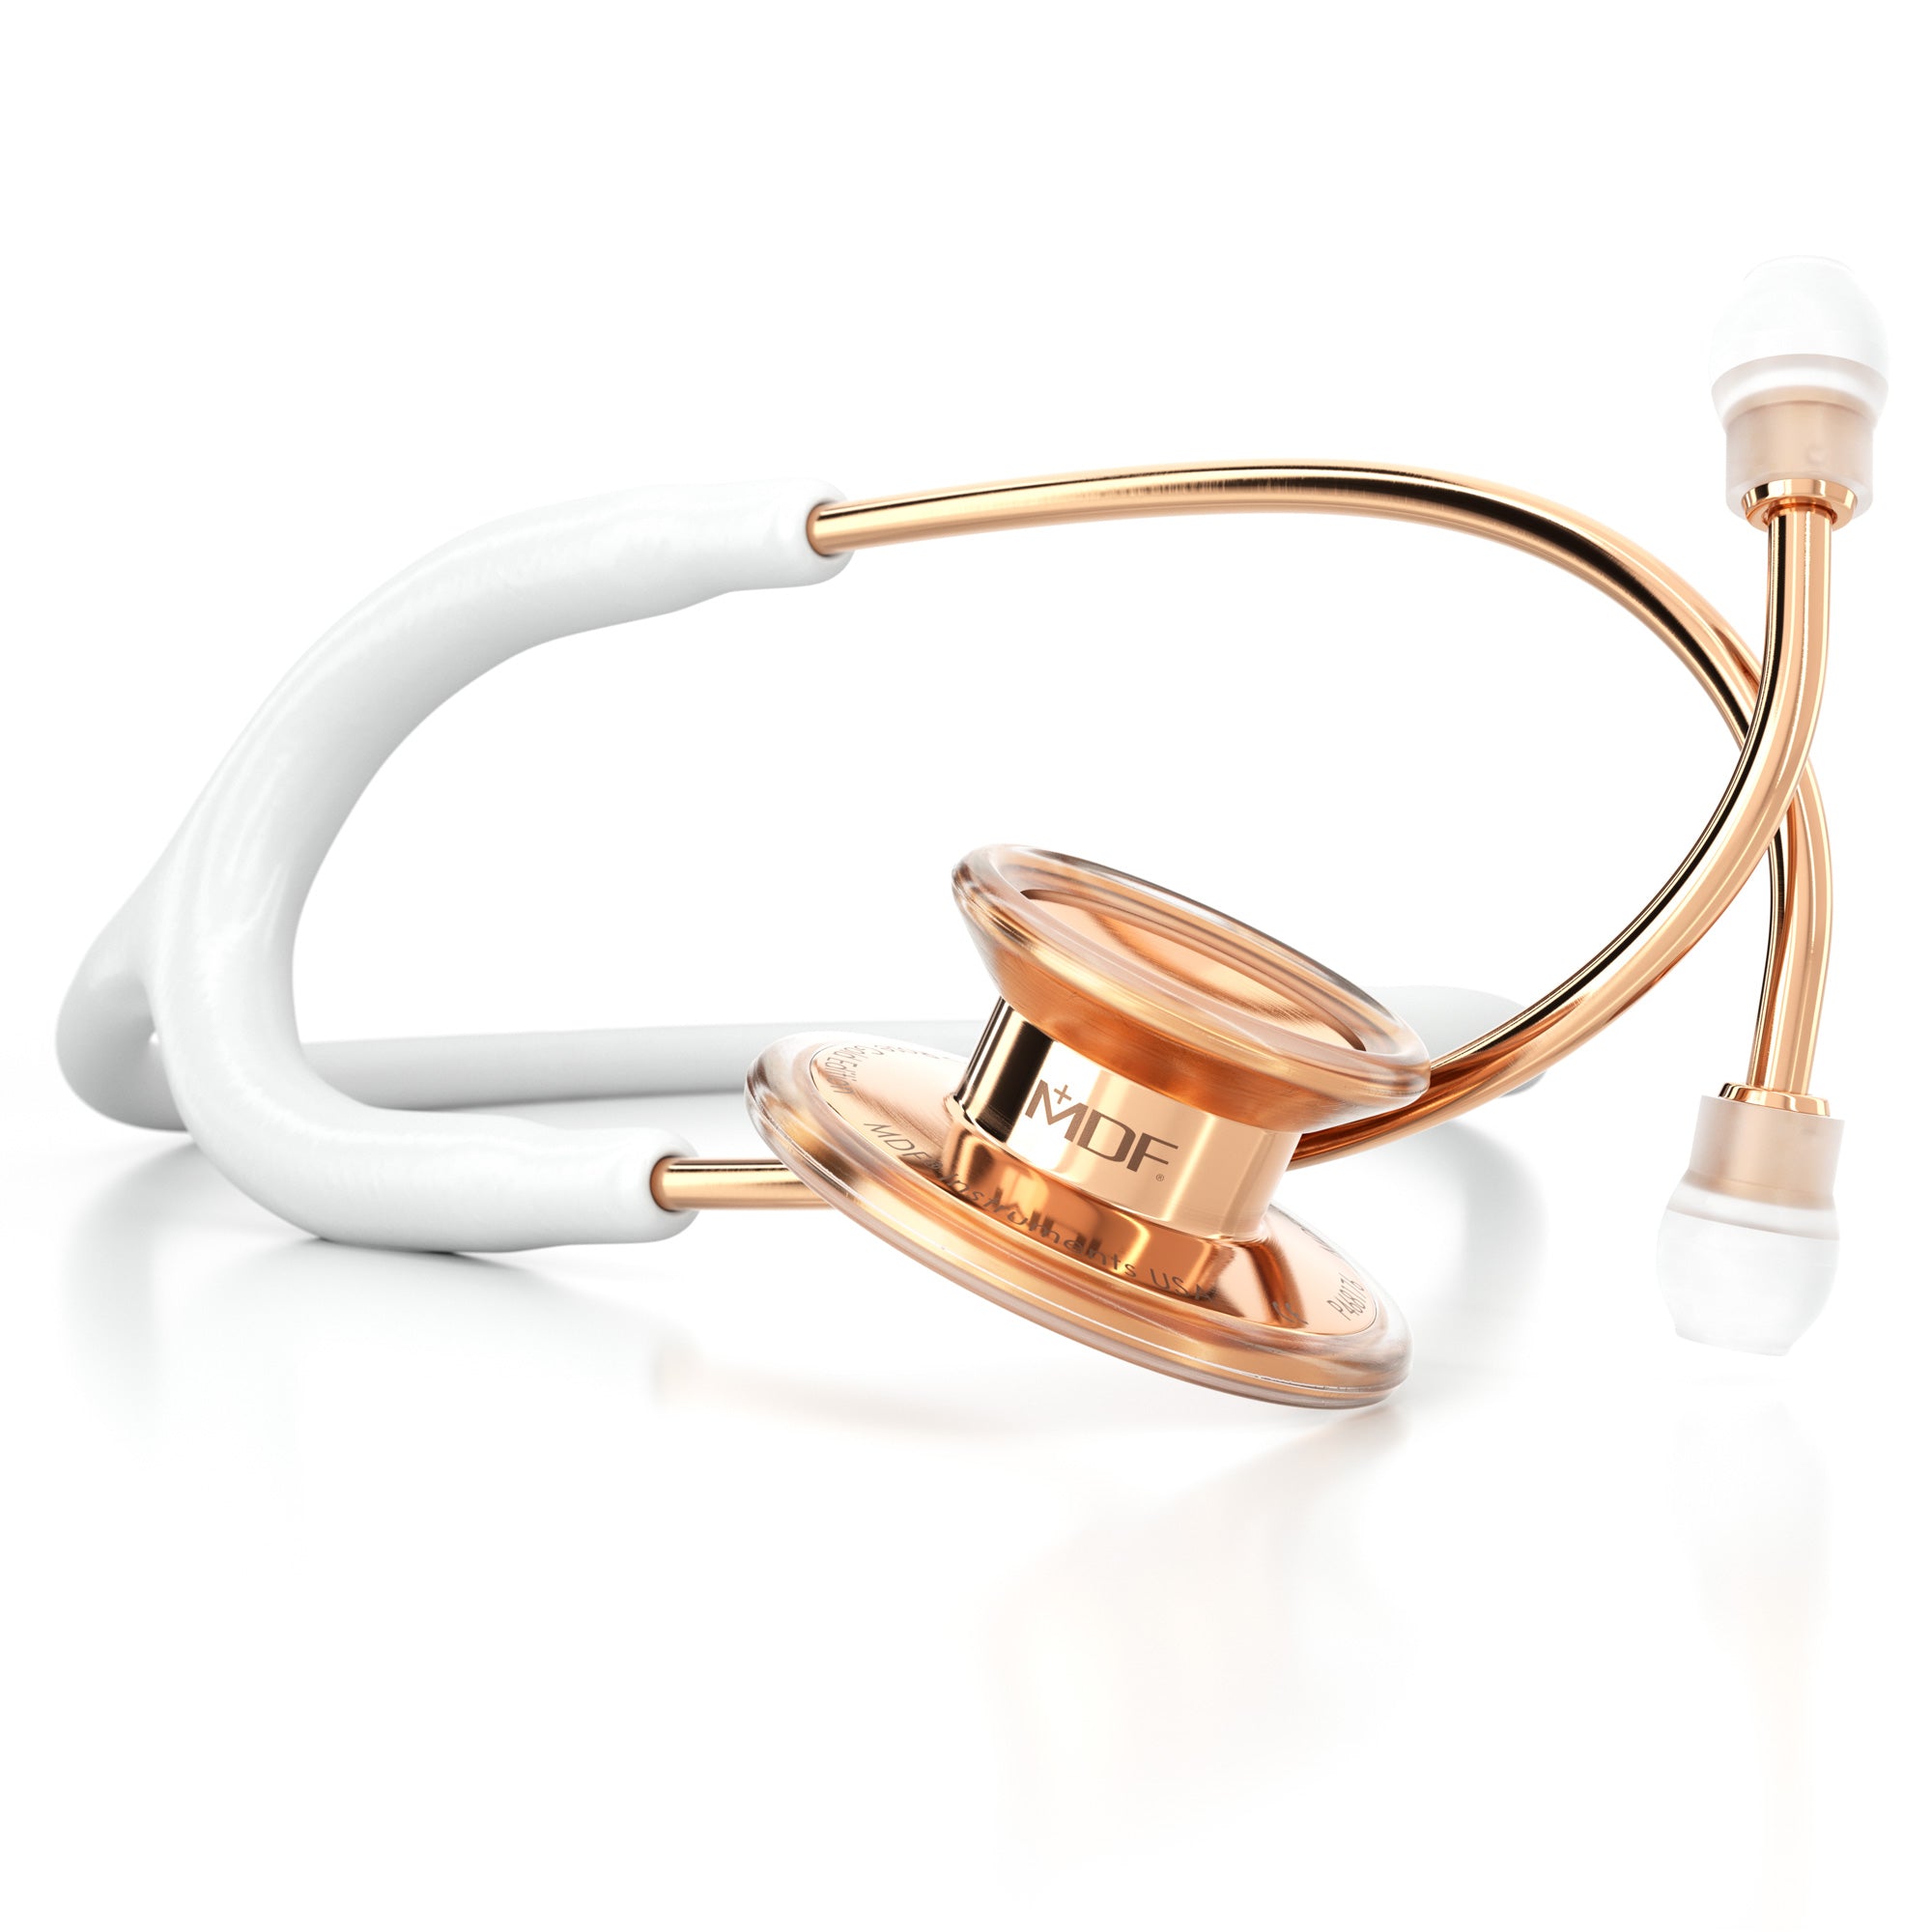 http://mdfinstruments.com/cdn/shop/products/MDF777RG29-mdf-instruments-stethoscope-rose-gold-white-md-one-dual-head-adult.jpg?v=1675422314